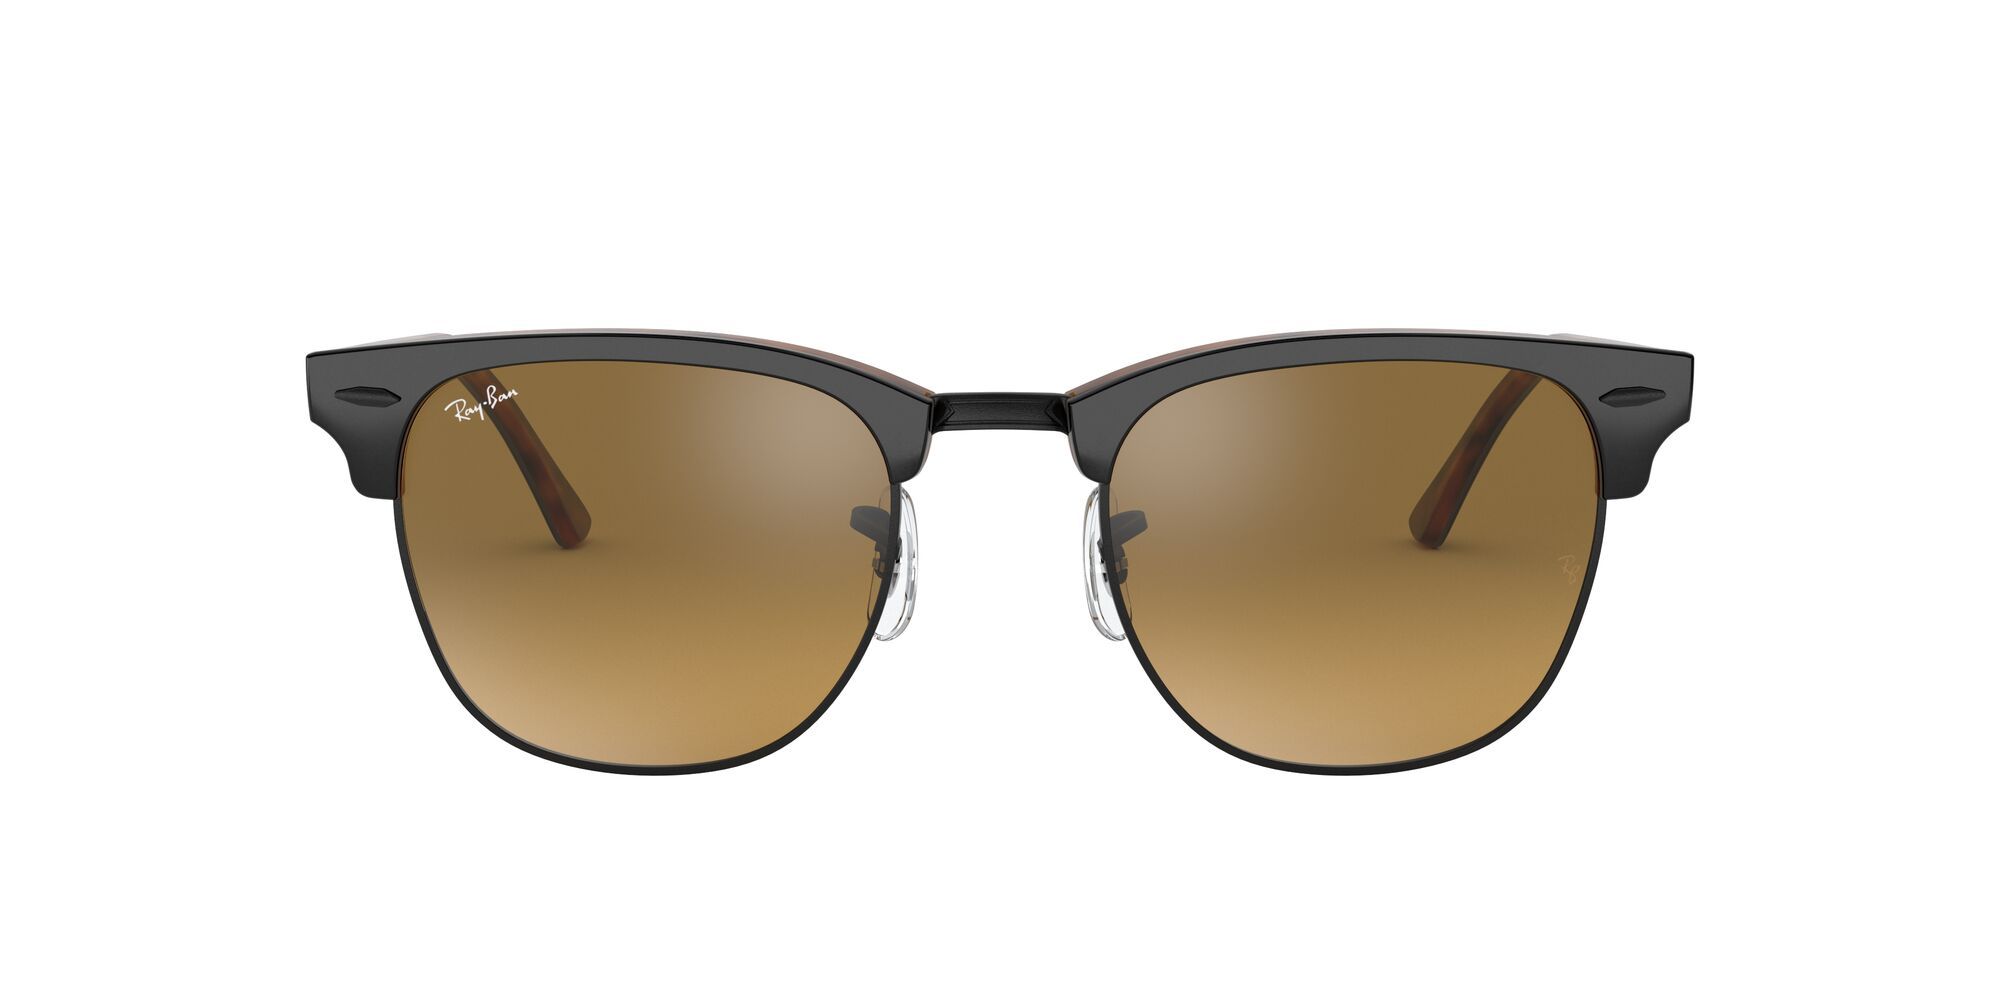 Ray-Ban 0RB3016 Brown Mirrored Icons Clubmaster Sunglasses (51 mm)